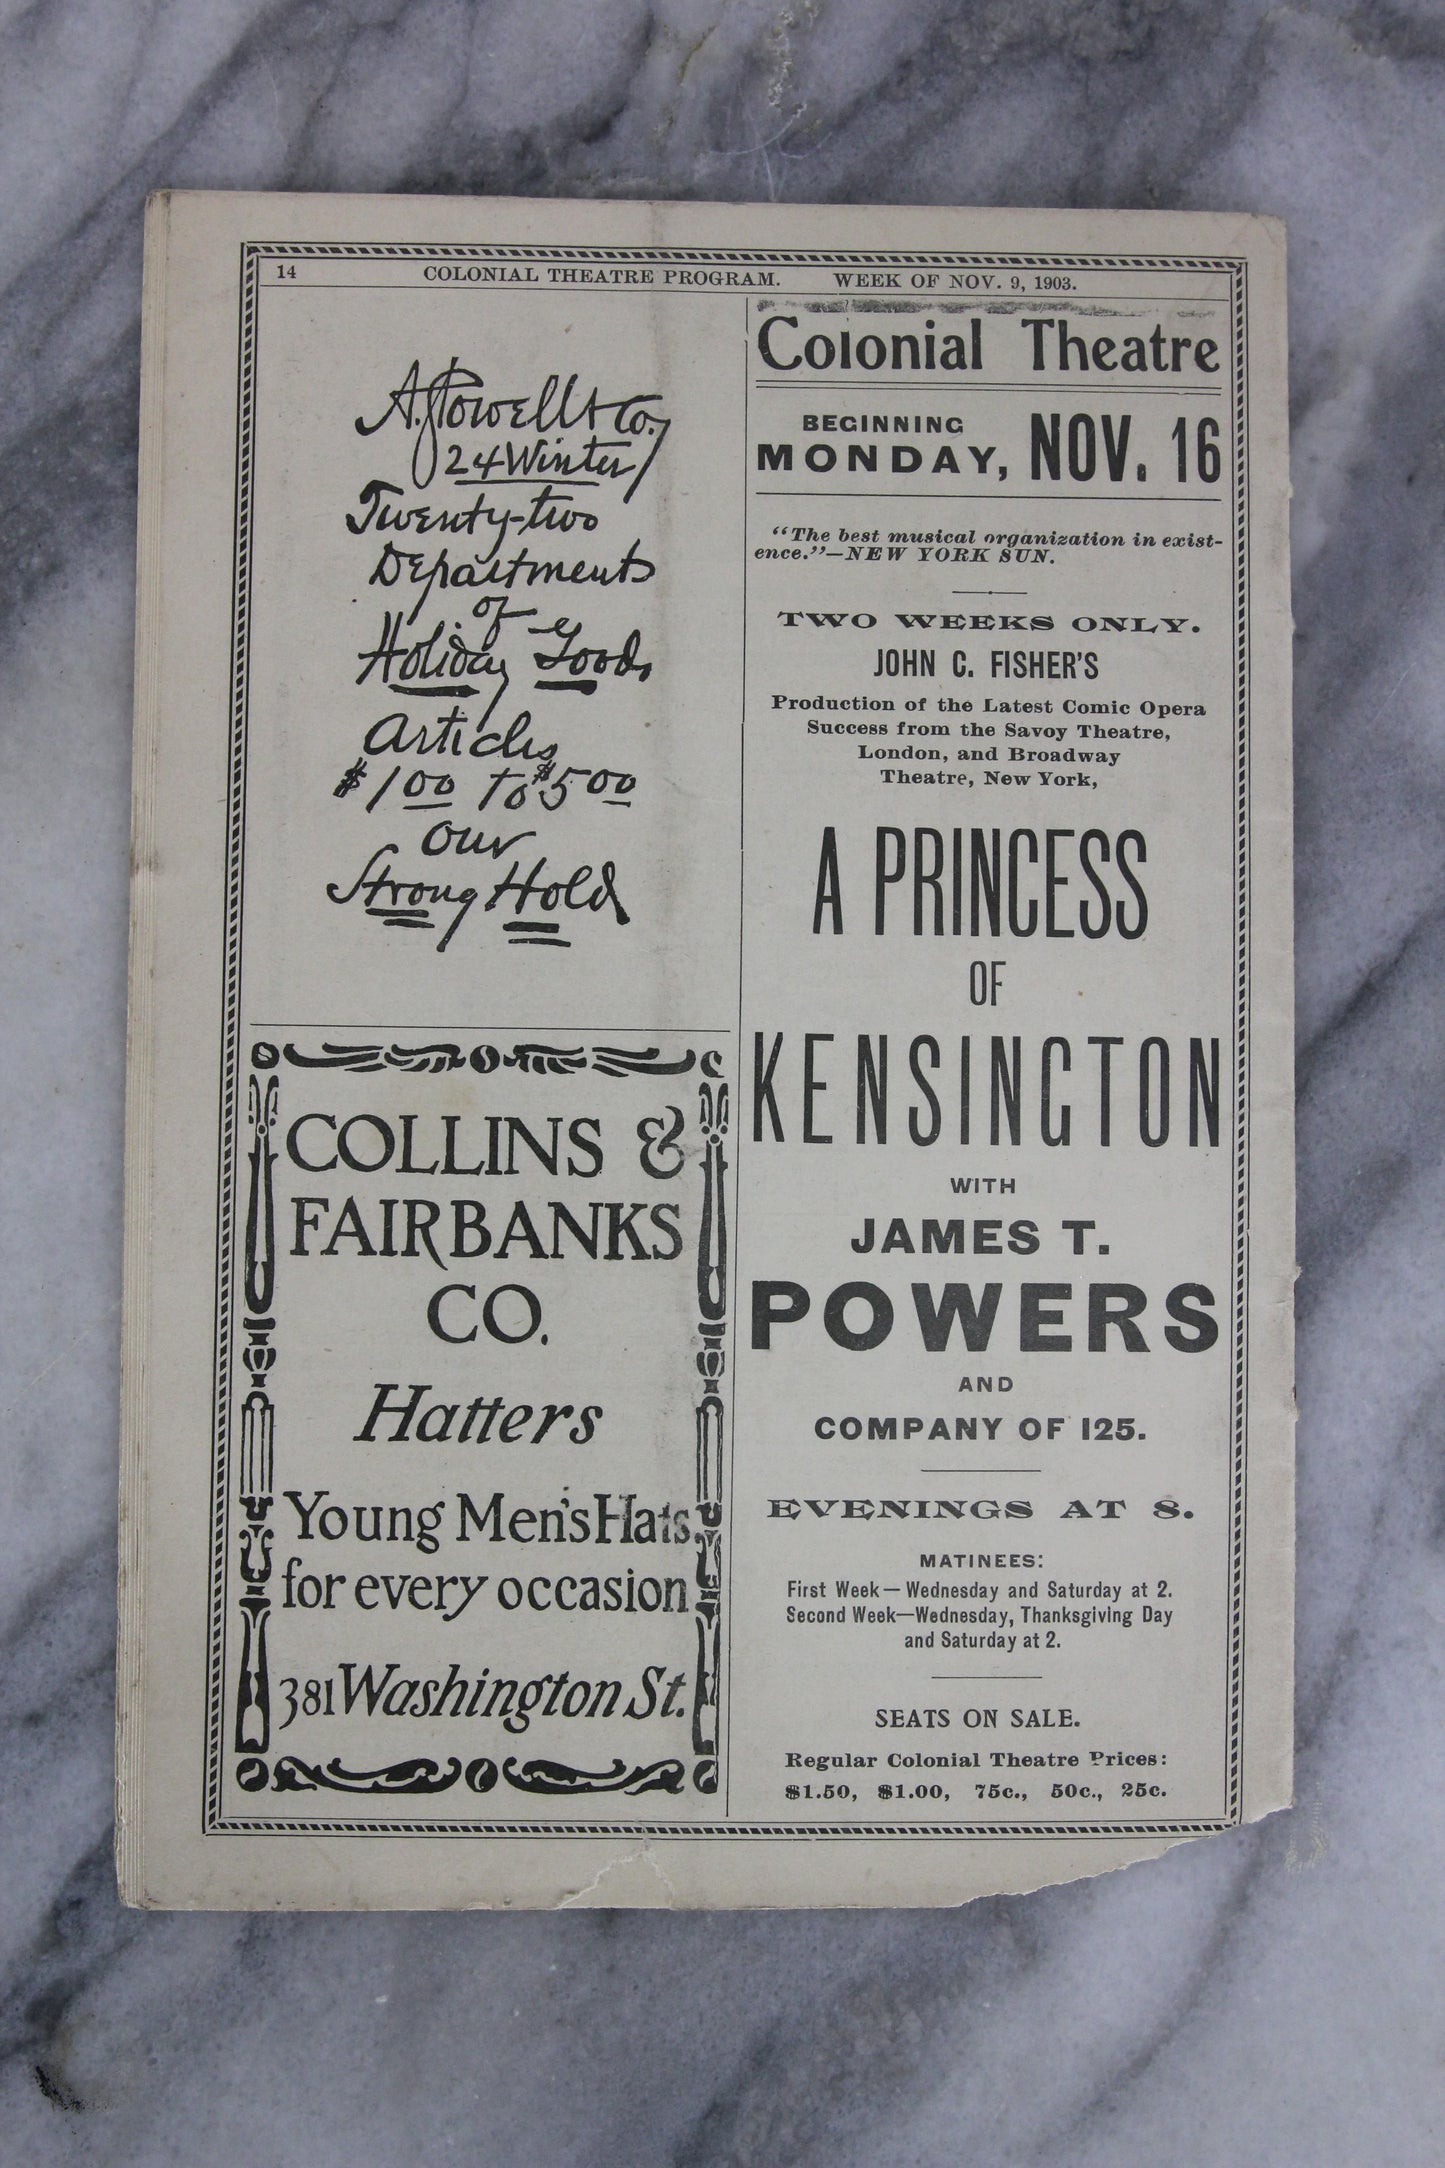 Antique Playbill from Colonial Theatre, Boston, Week of Nov. 9, 1903